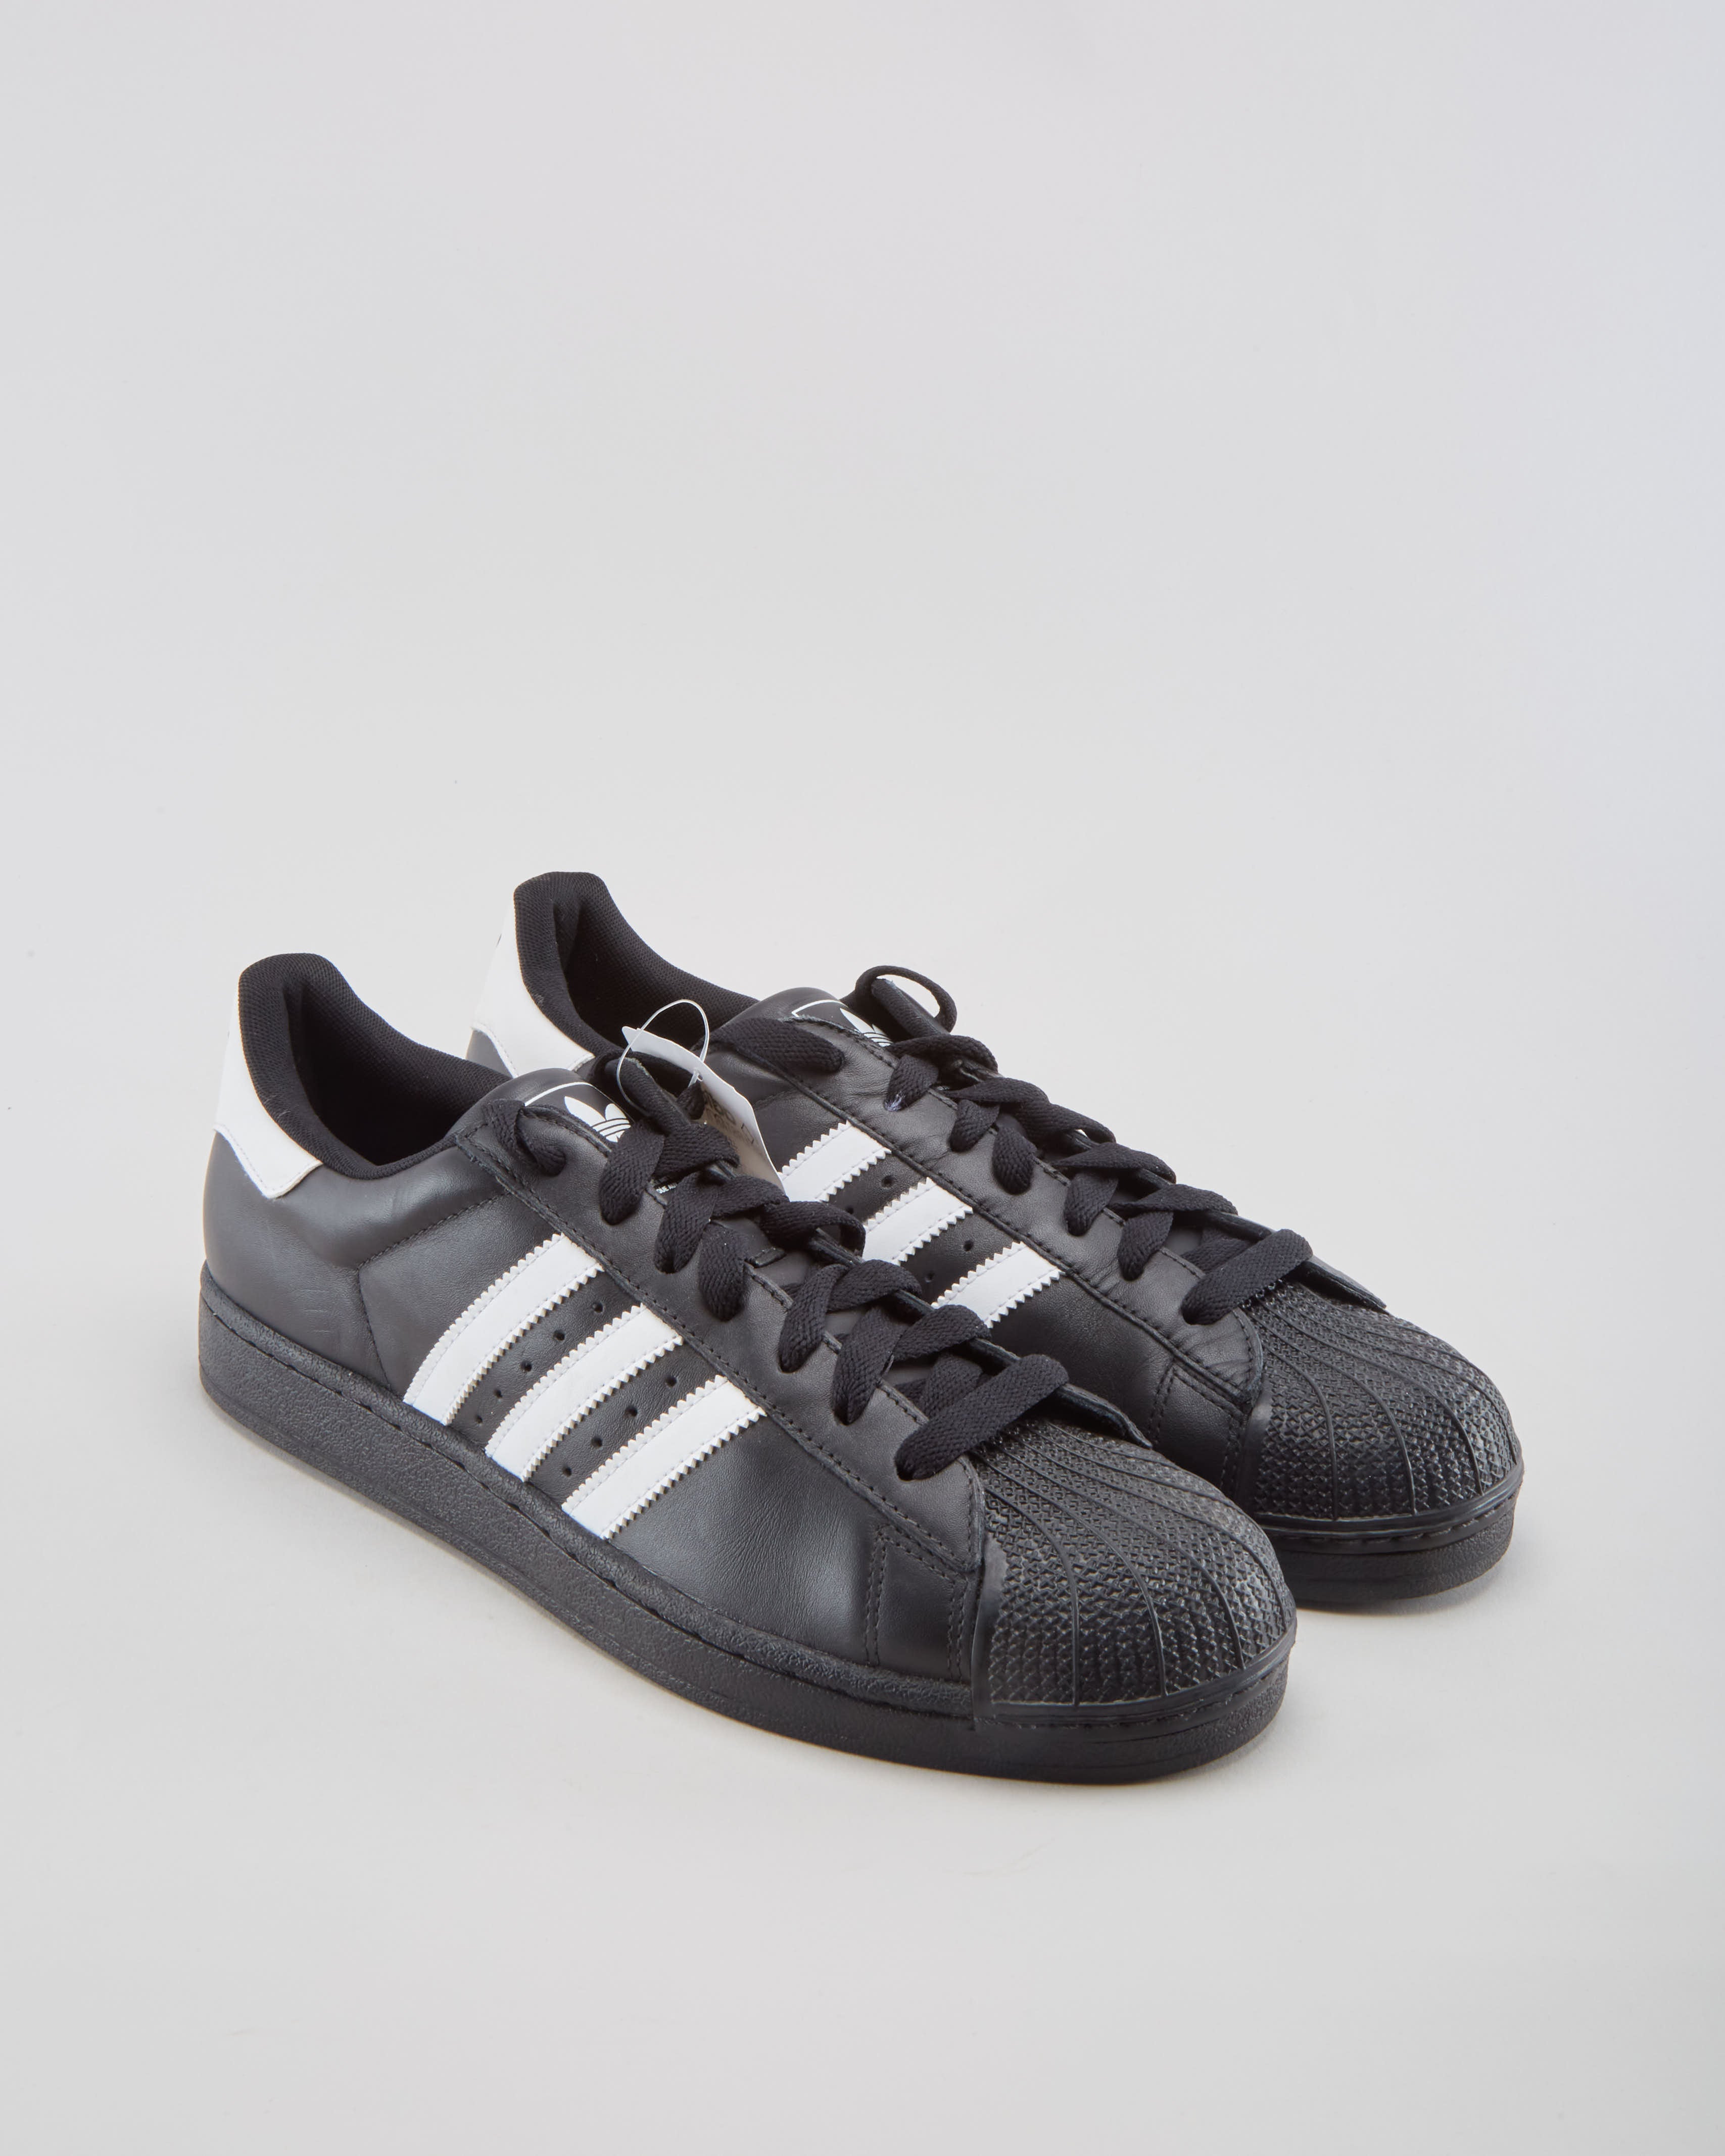 Adidas Superstar Black Brand New With Tag - Mens UK 11 1/2